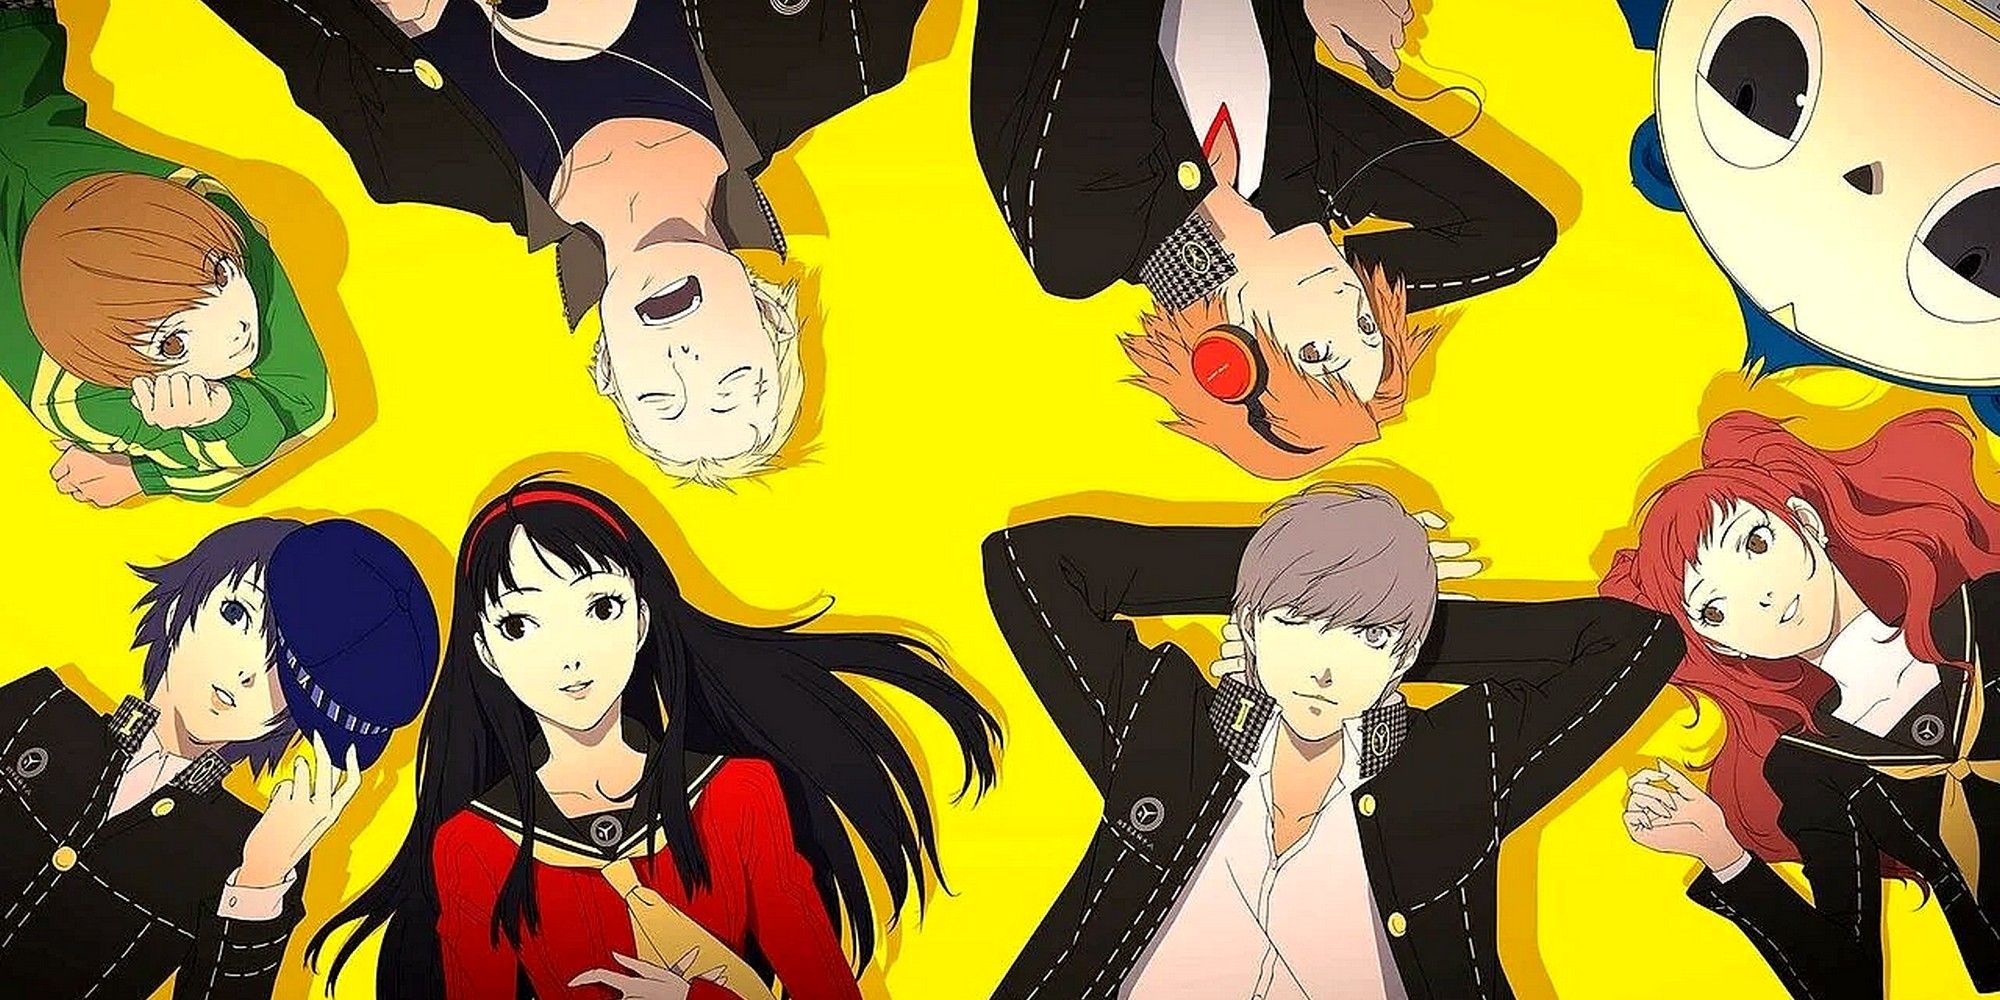 Persona 4 Golden Endings guide: True Ending Requirements & how to